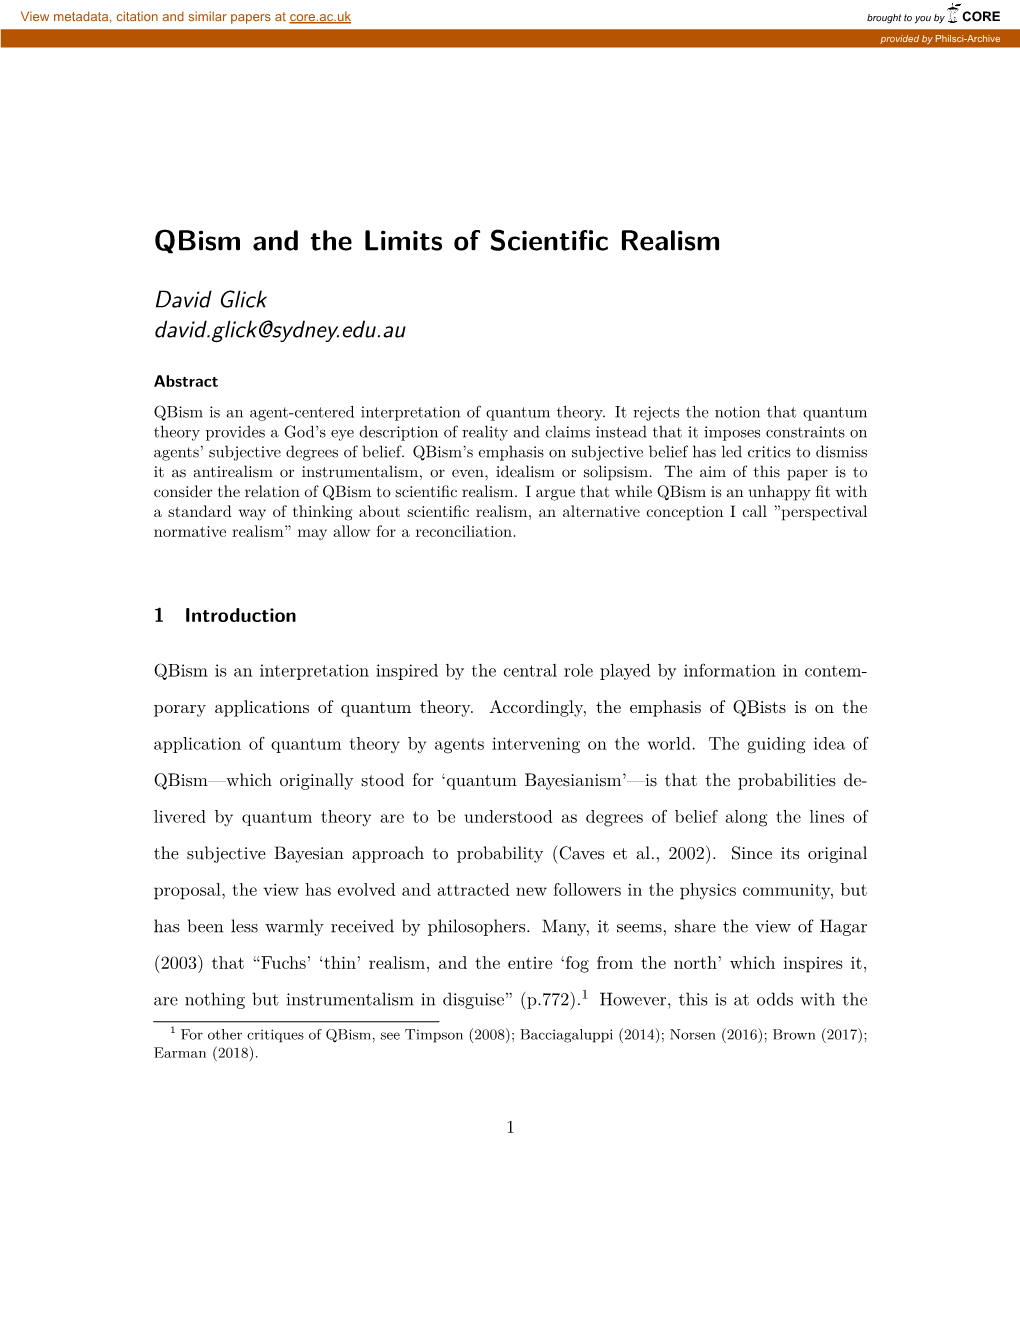 Qbism and the Limits of Scientific Realism